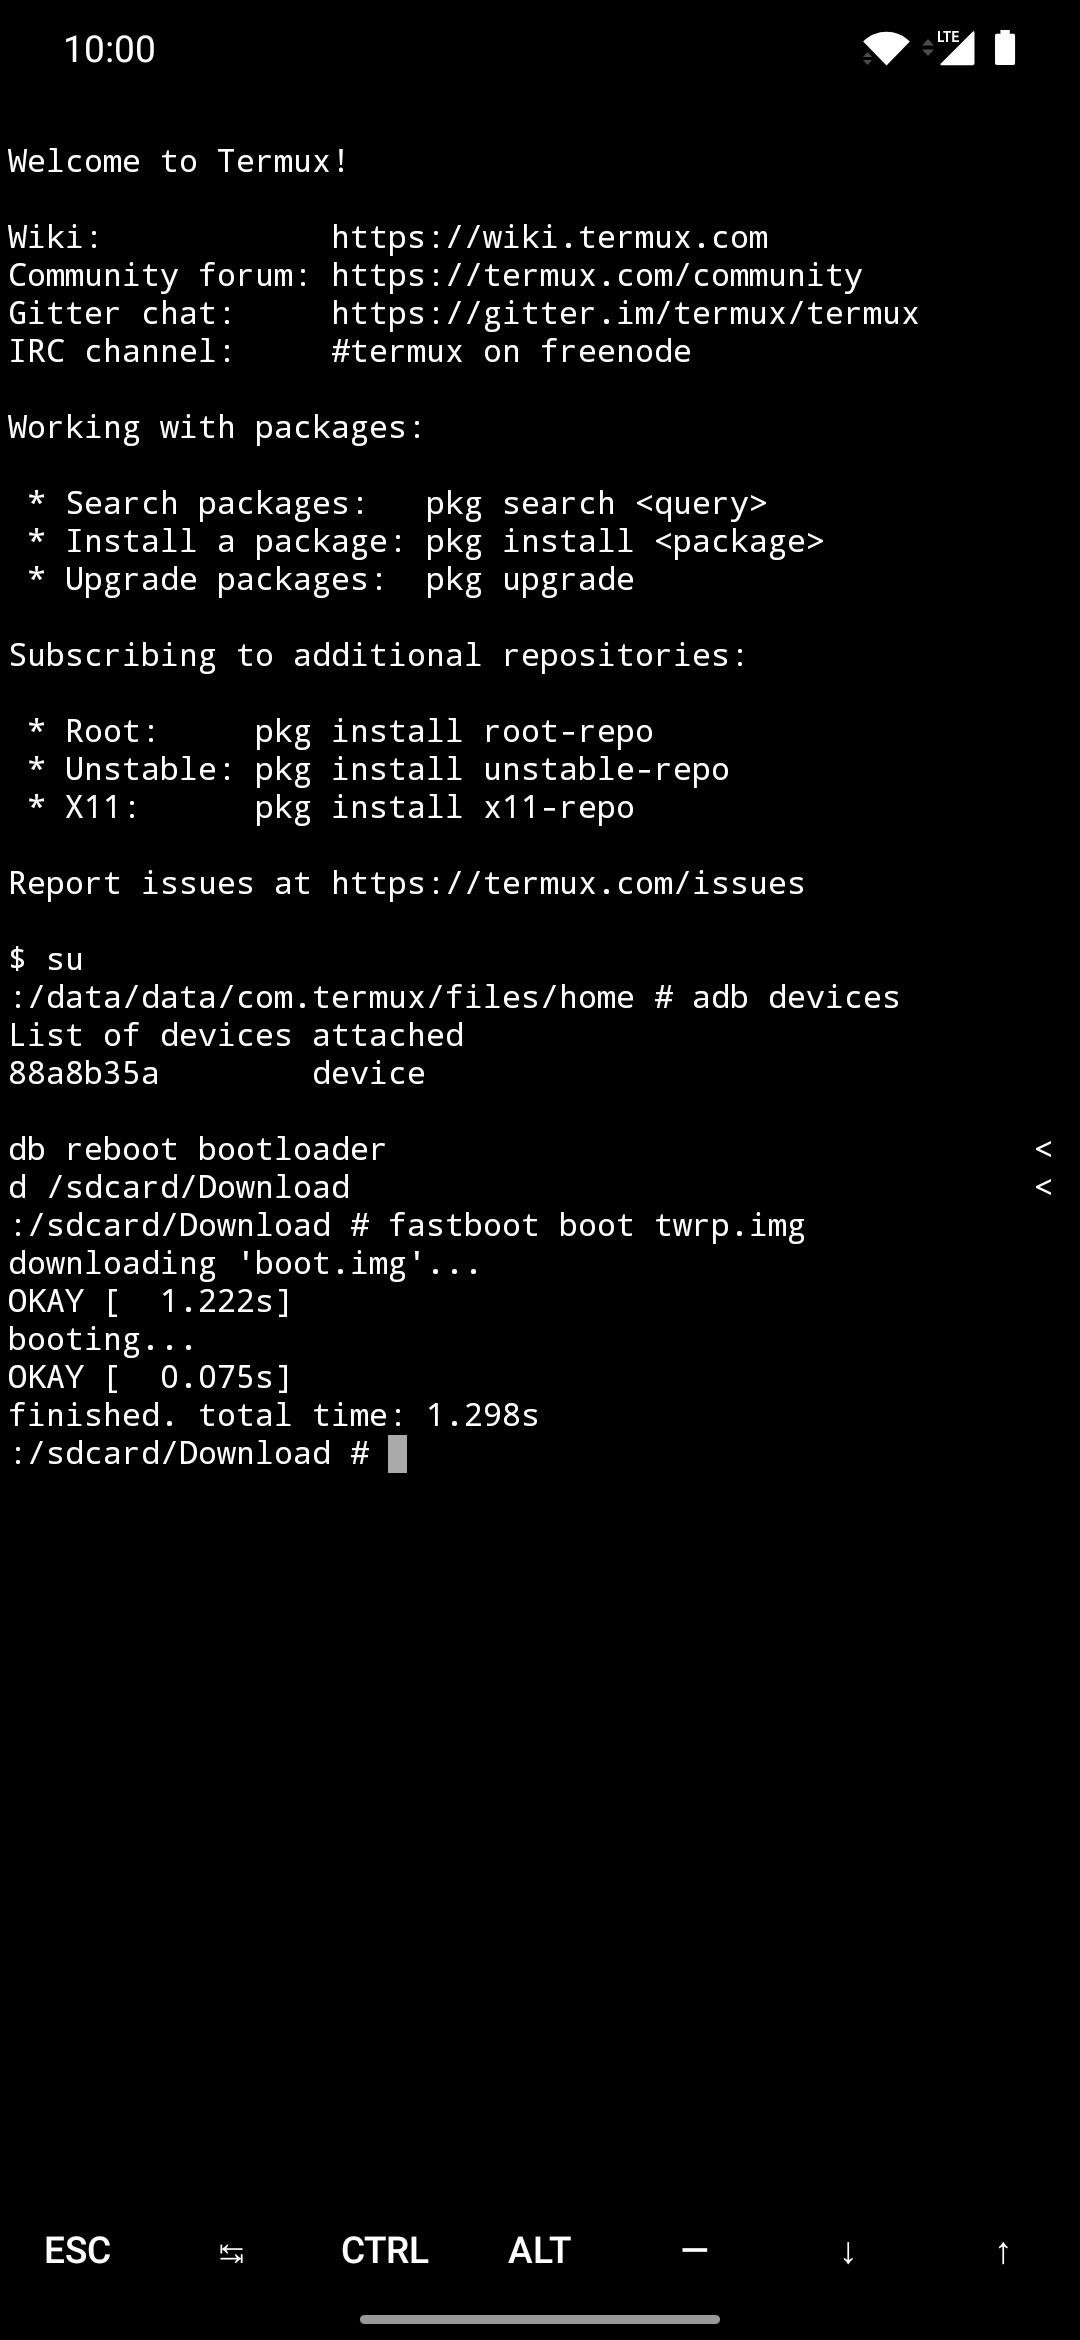 How to Install TWRP Without a Computer